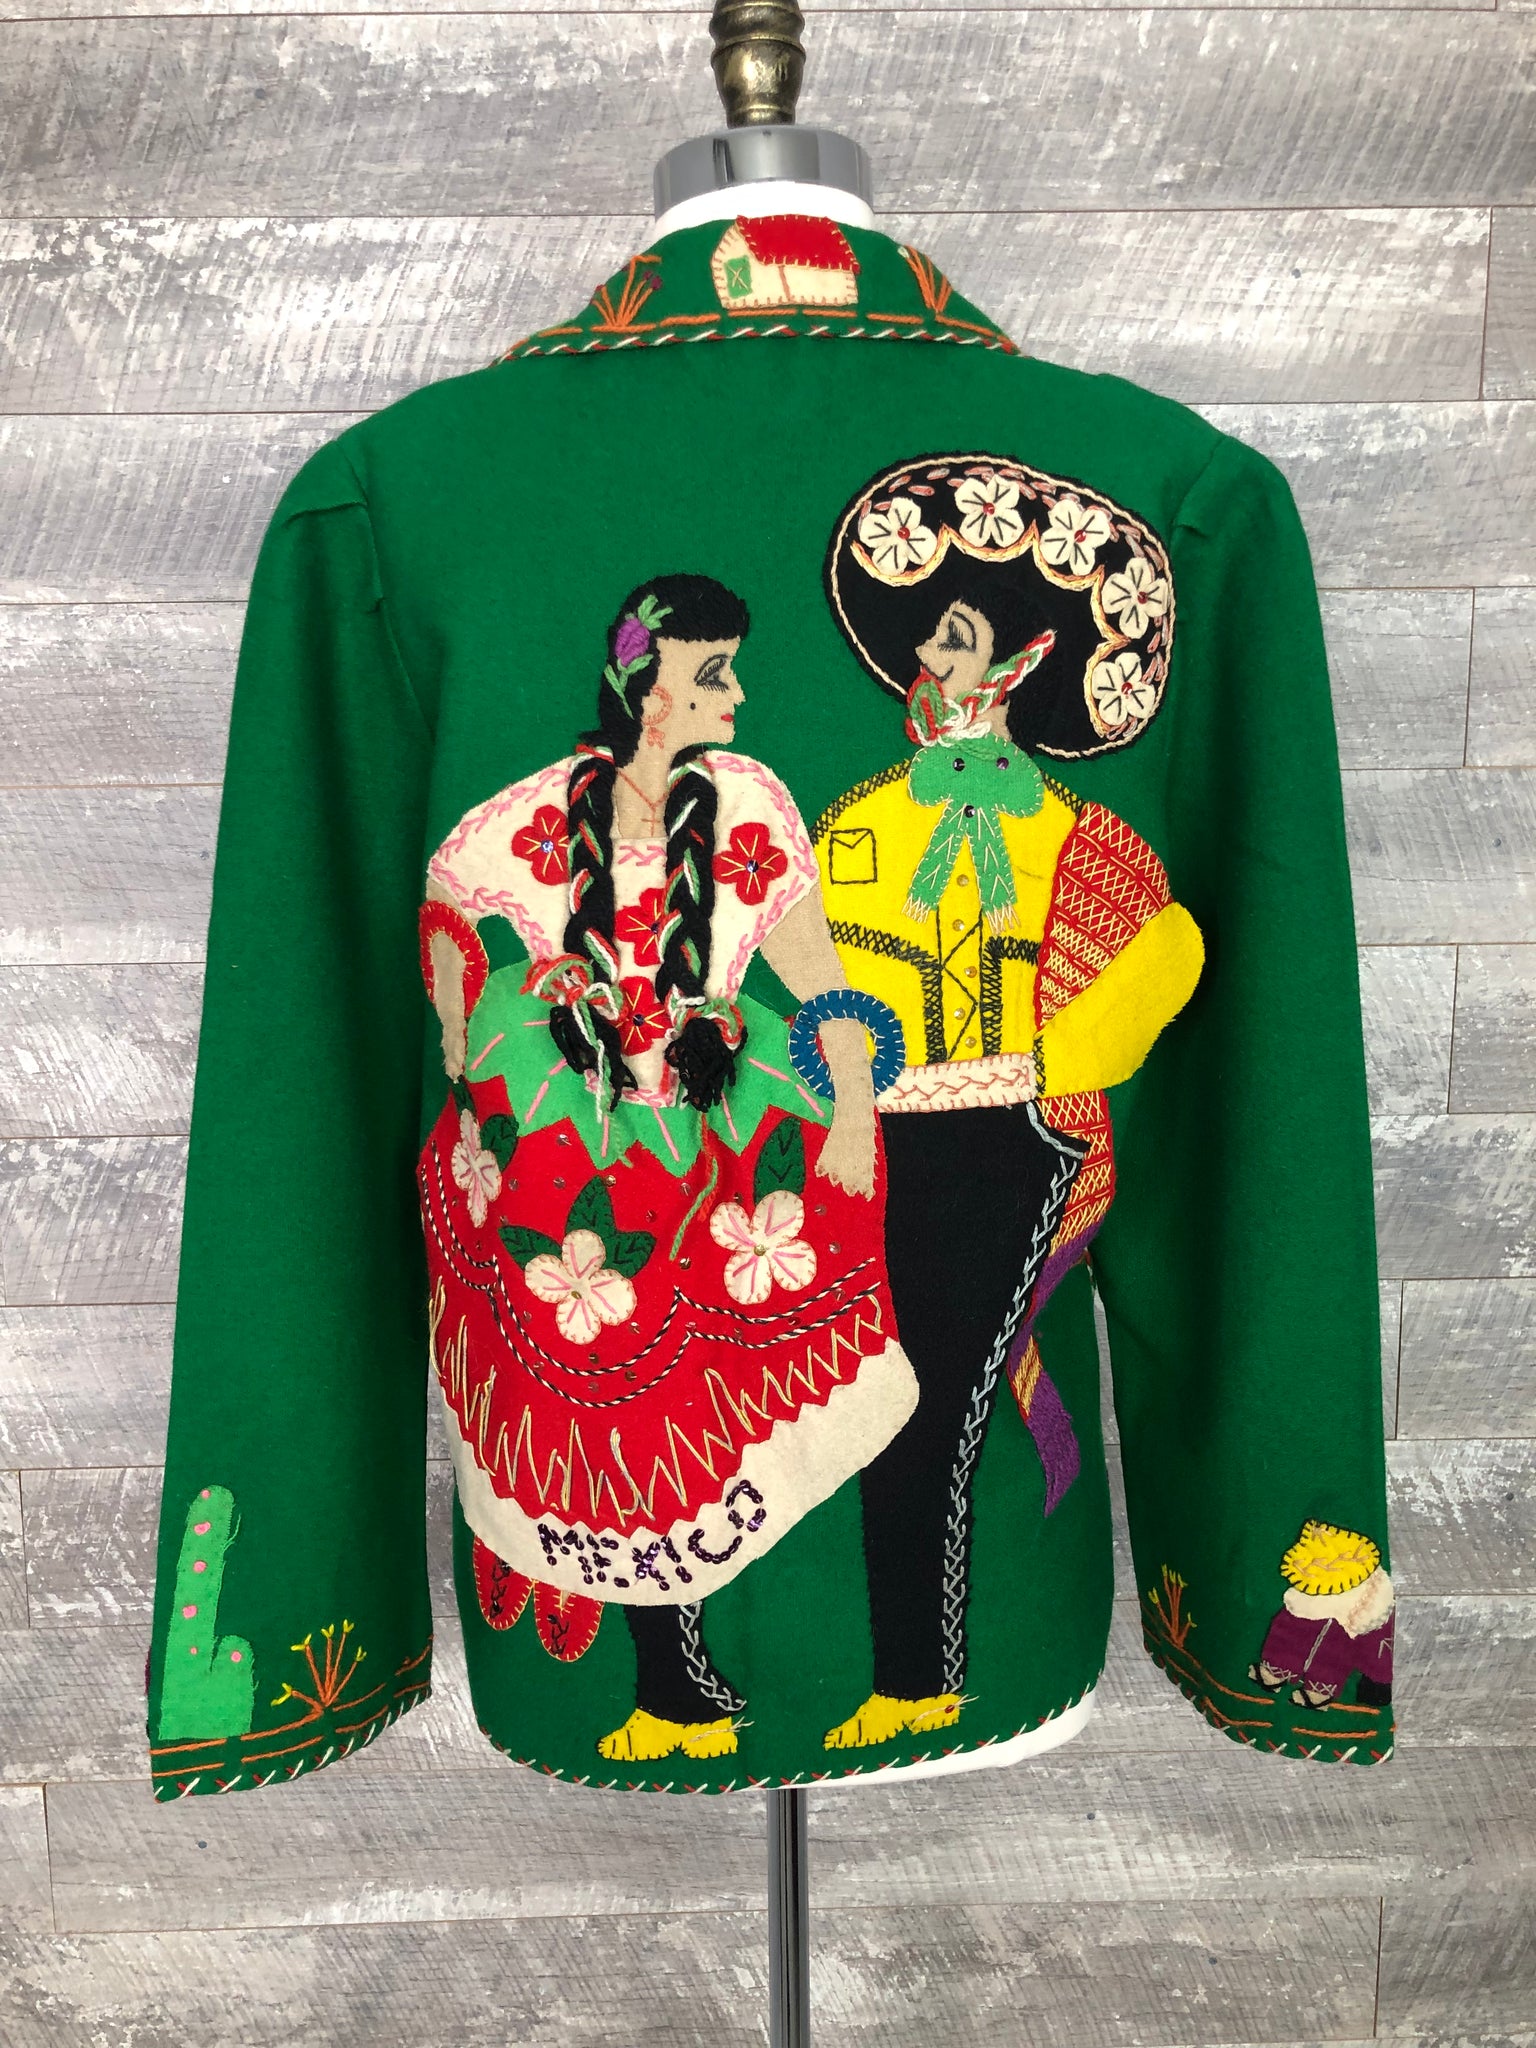 40s bright green wool Mexican jacket